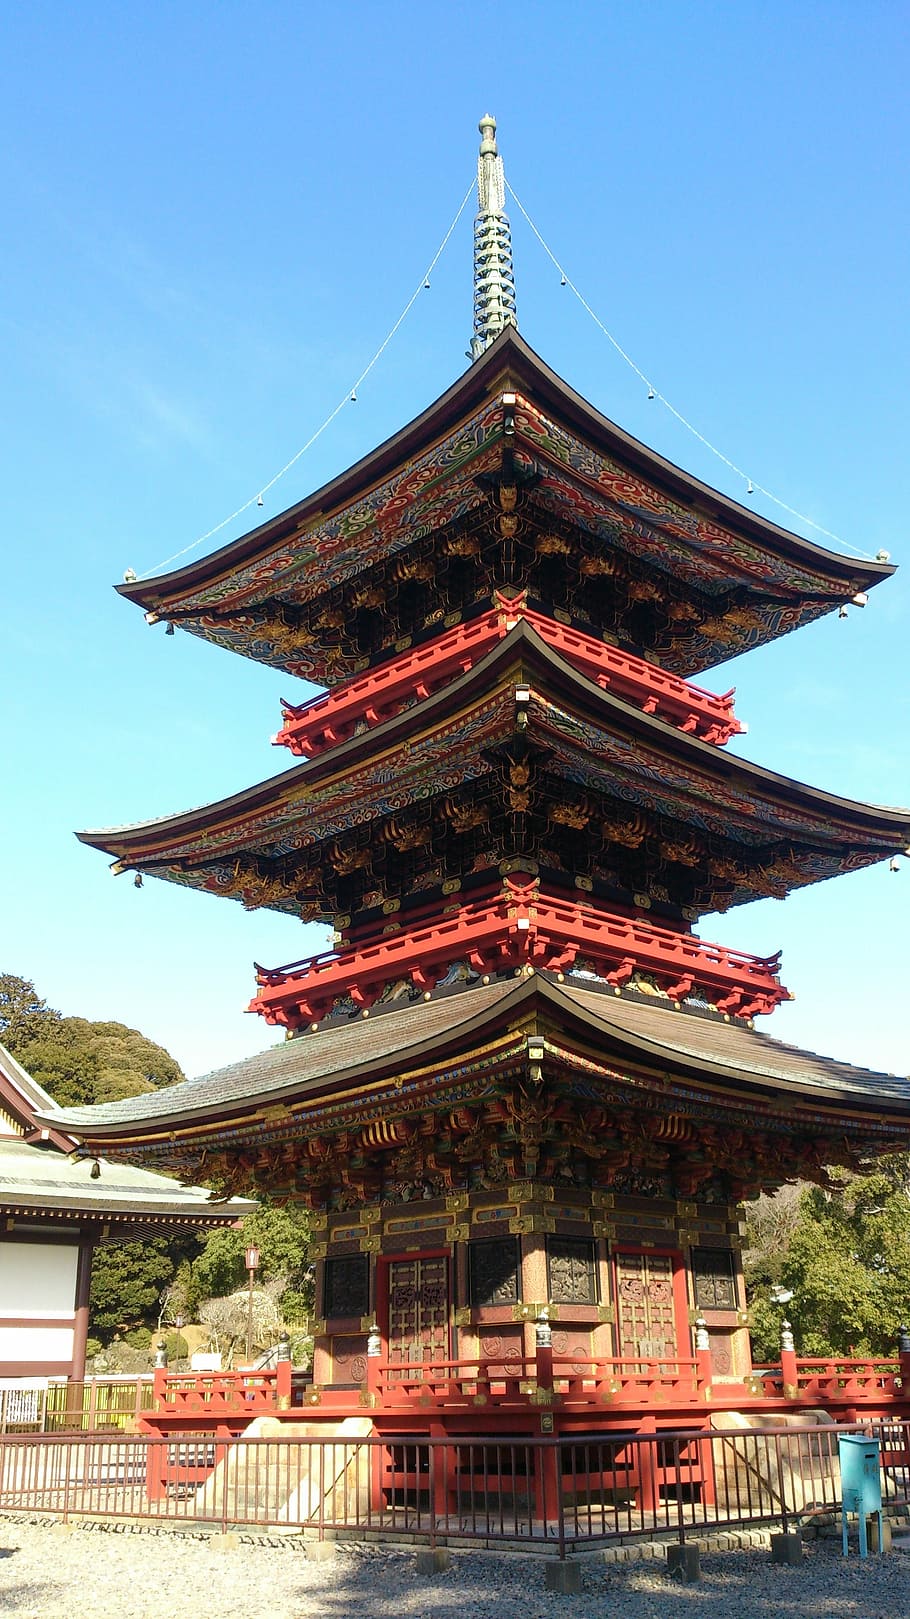 naritasan, three-story pagoda, building, asia, temple - Building, architecture, famous Place, cultures, japan, east Asian Culture